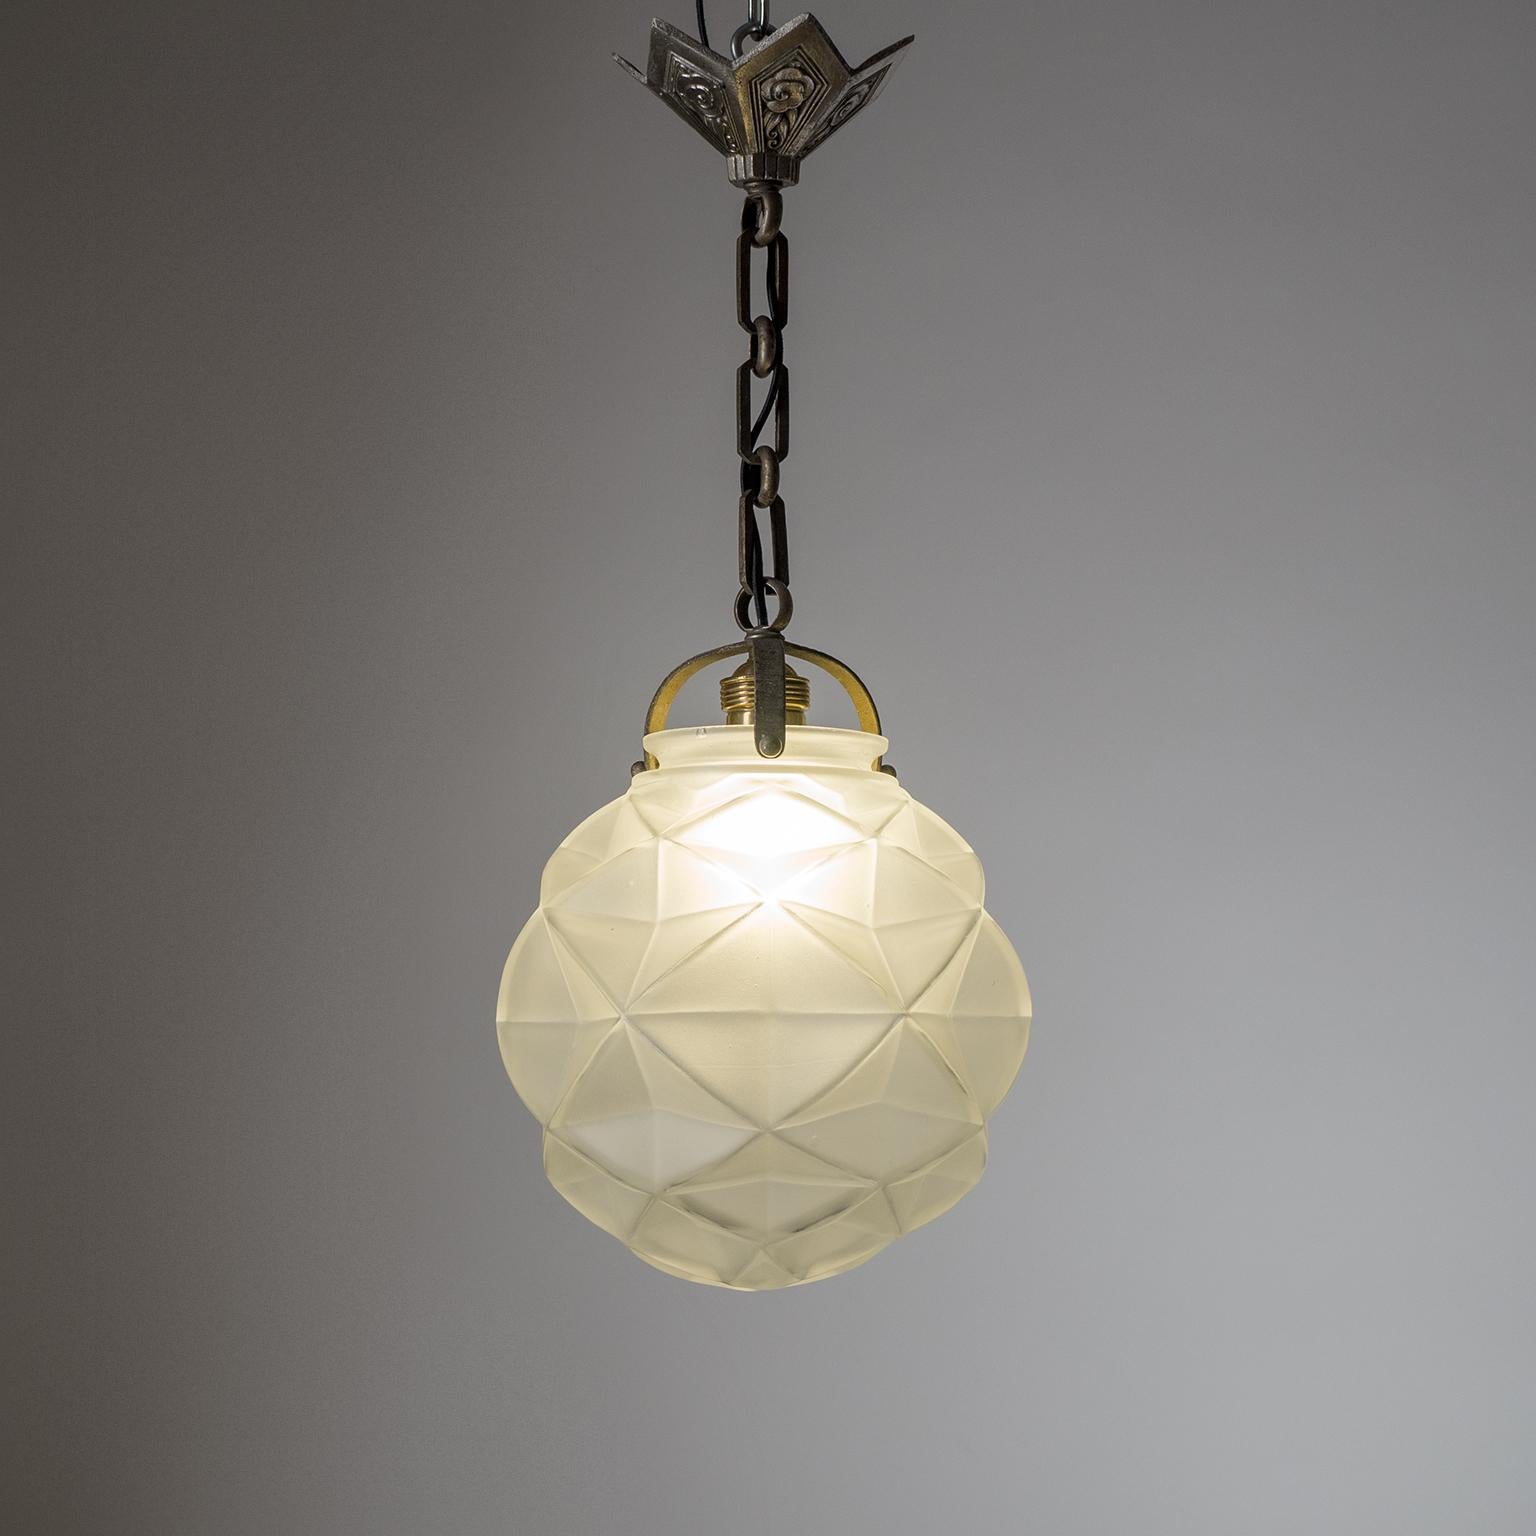 French Art Deco Pendant, 1930s, Satin Glass and Nickel 3